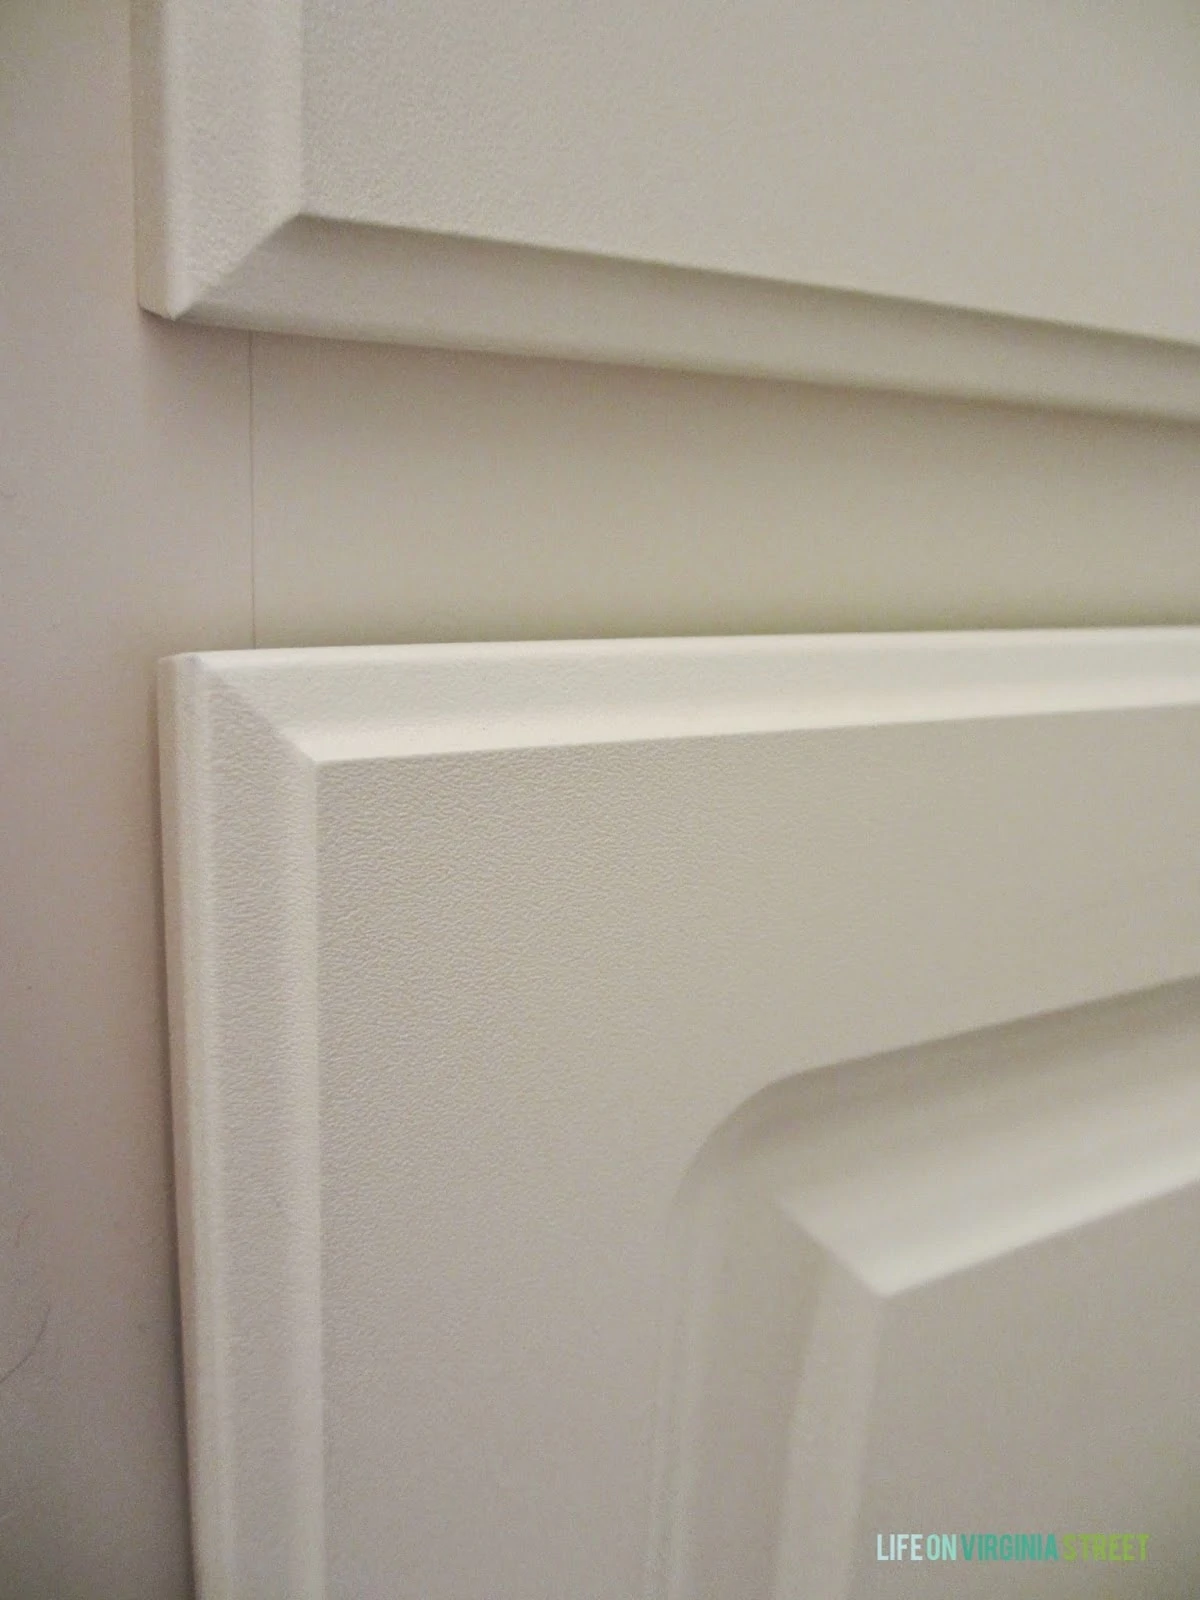 Close up of the cream white laminate bathroom cabinets I'm planning to paint.